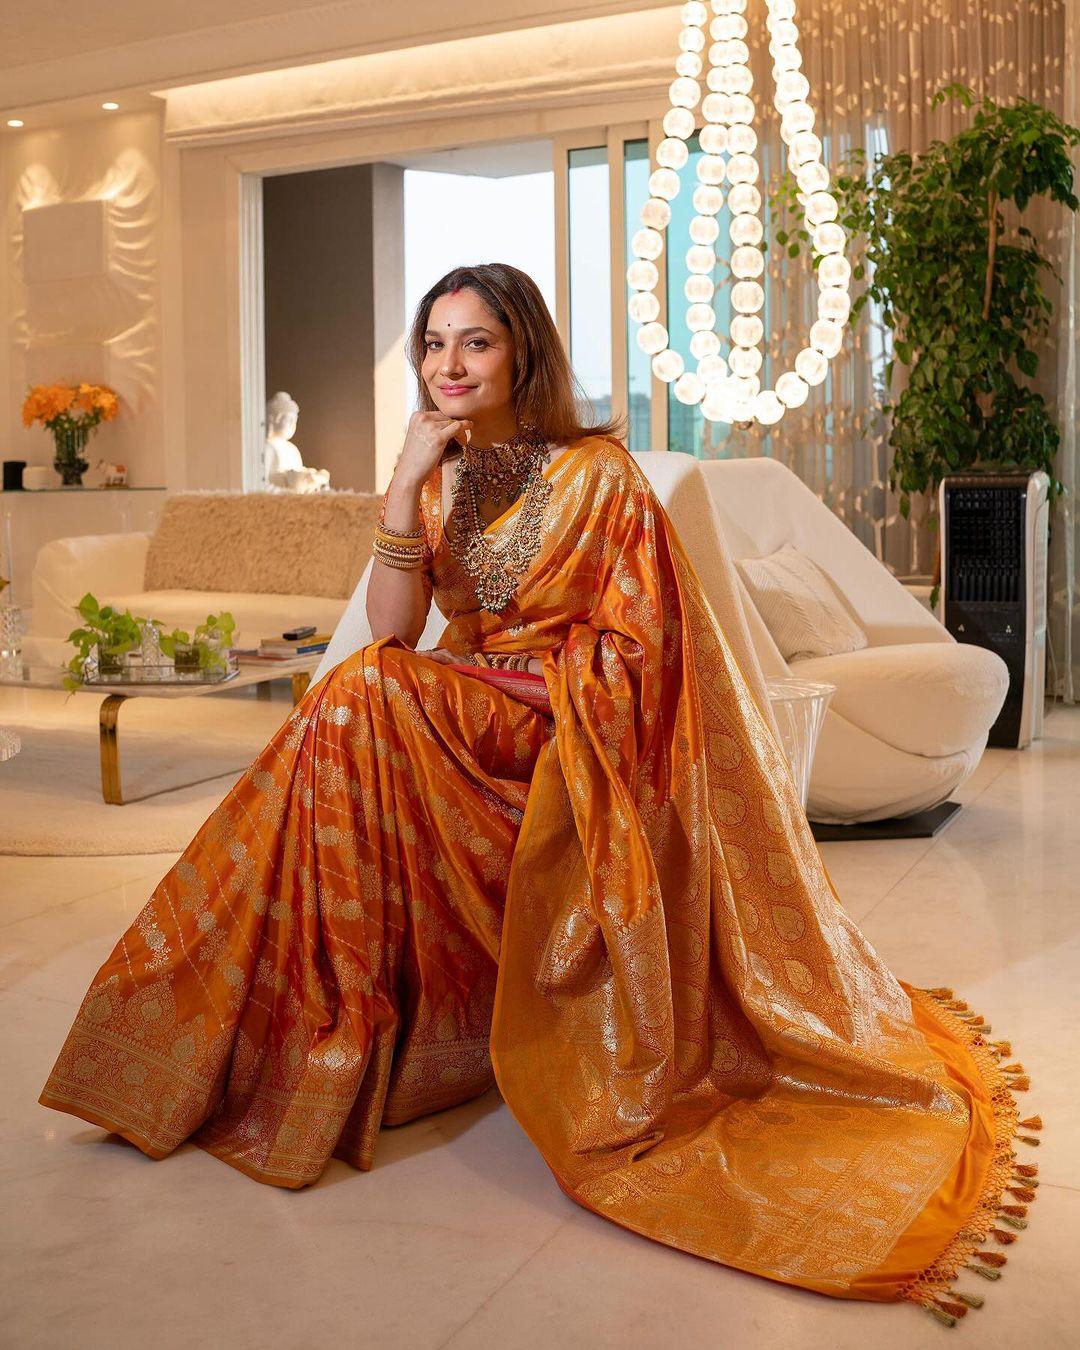  In this breathtaking picture, Ankita wore a beautiful orange saree with golden embroidery all over it. The actress styled her saree with a matching blouse